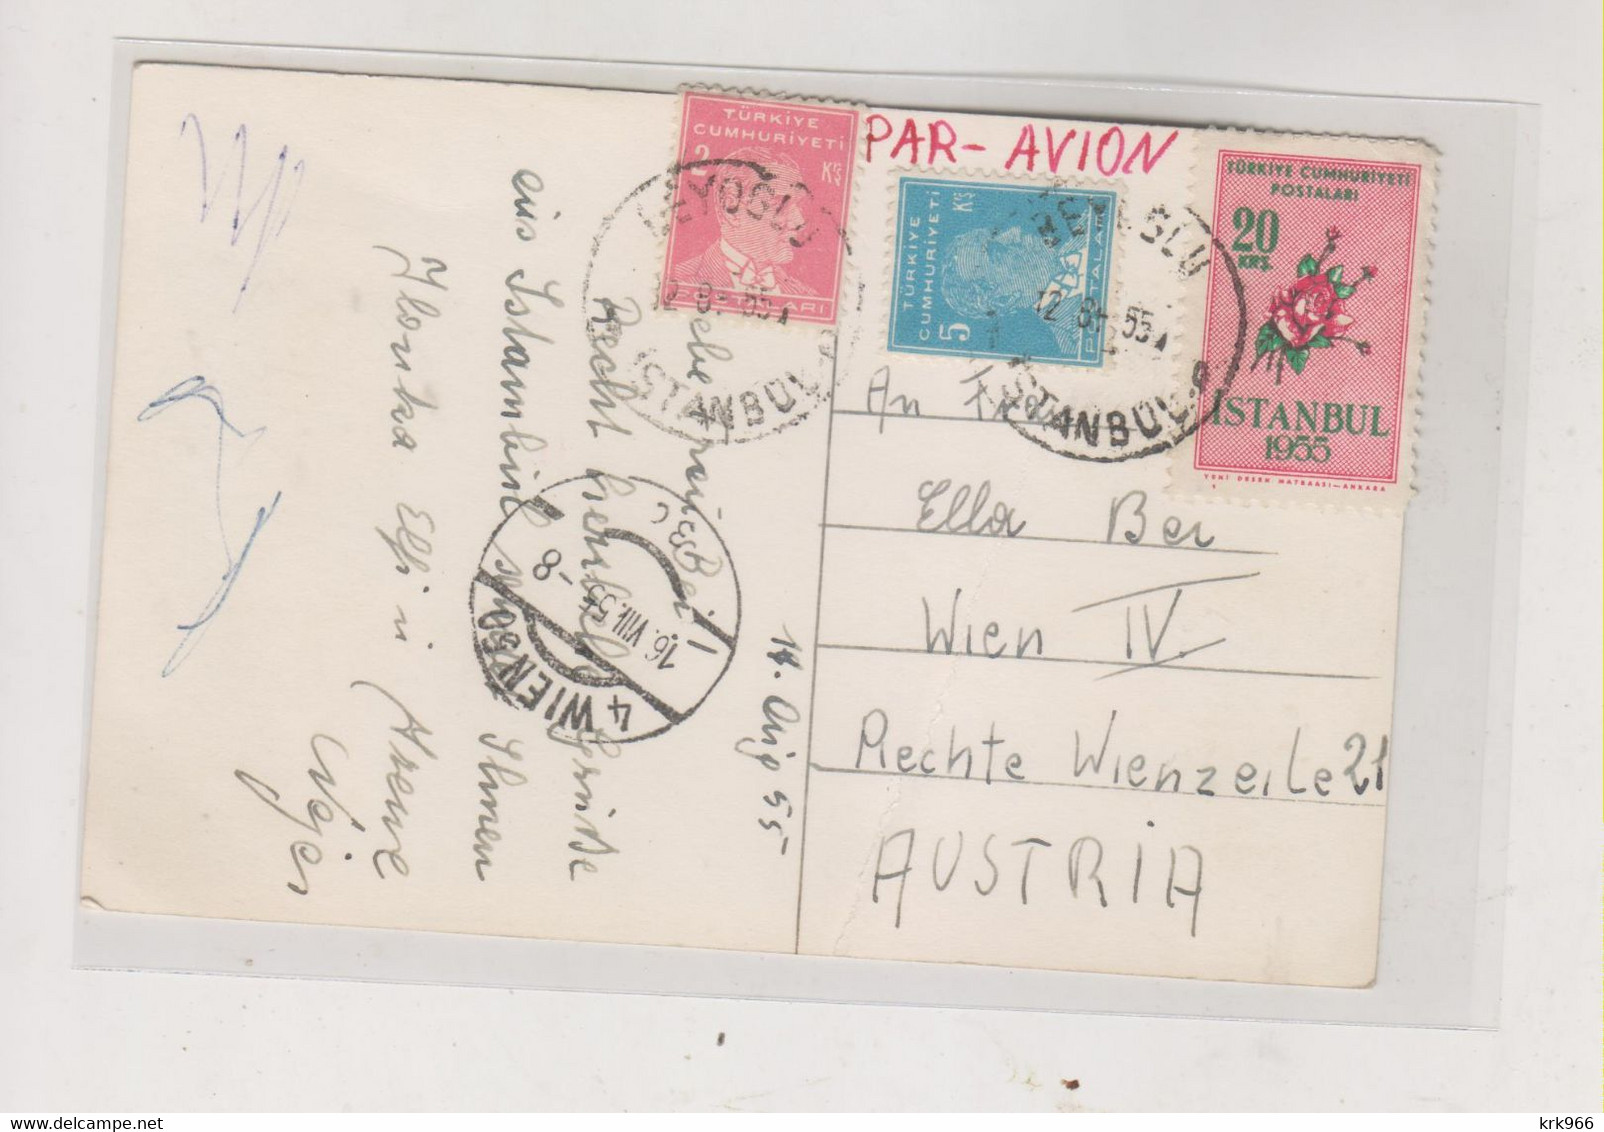 TURKEY 1955 ISTANBUL  Nice Airmail Postcard To Austria - Covers & Documents